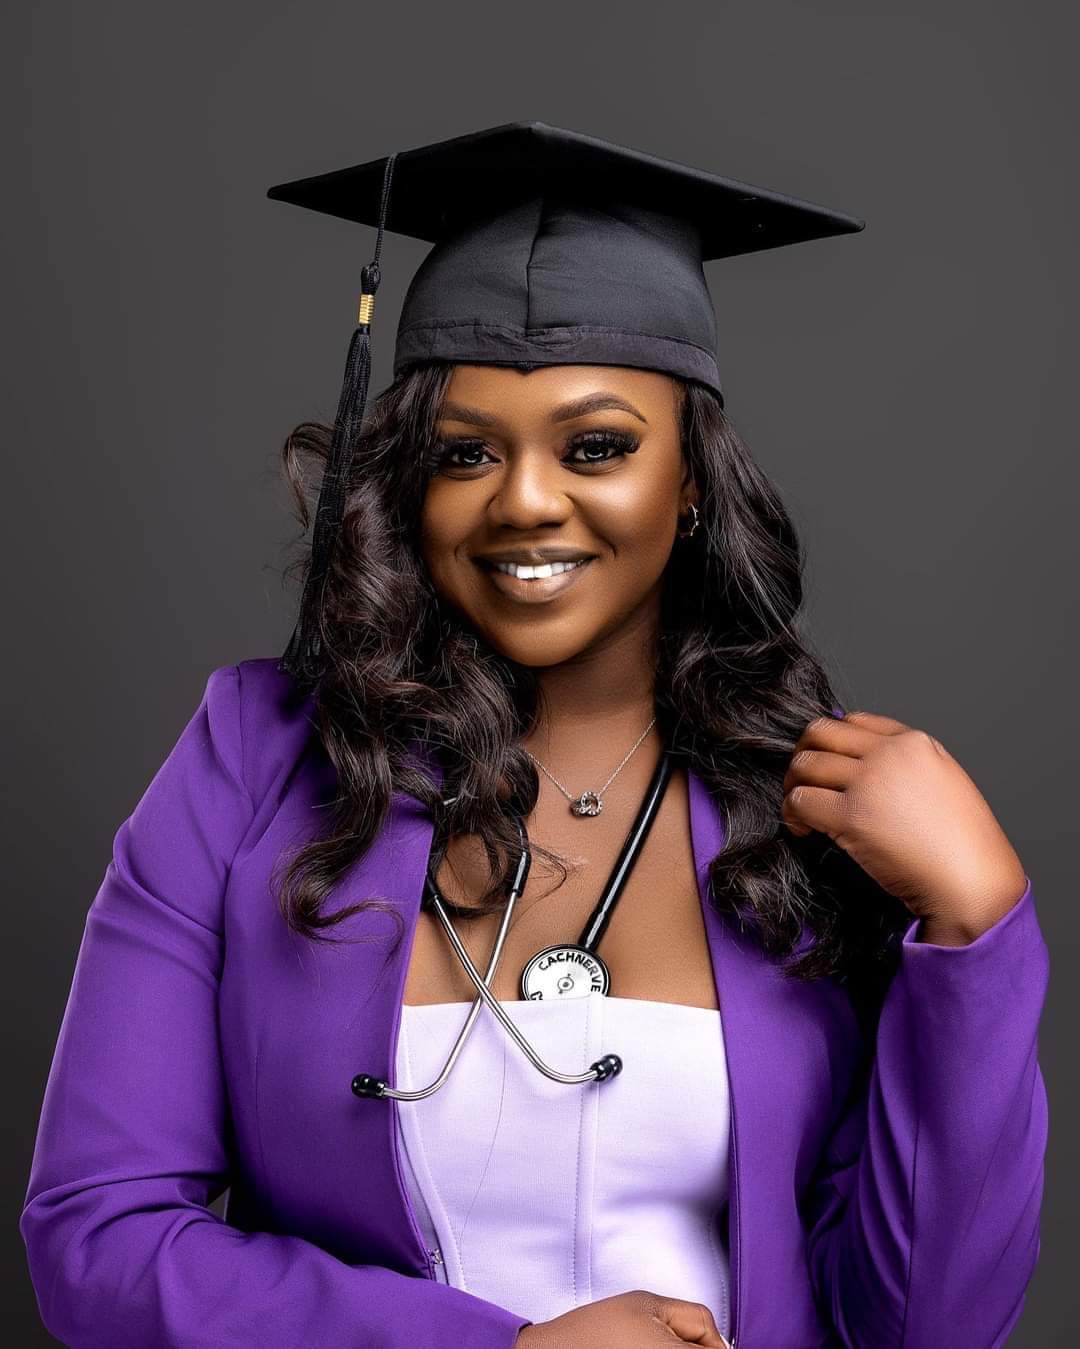 Cardiac patient defies odds to become doctor with 2 degrees